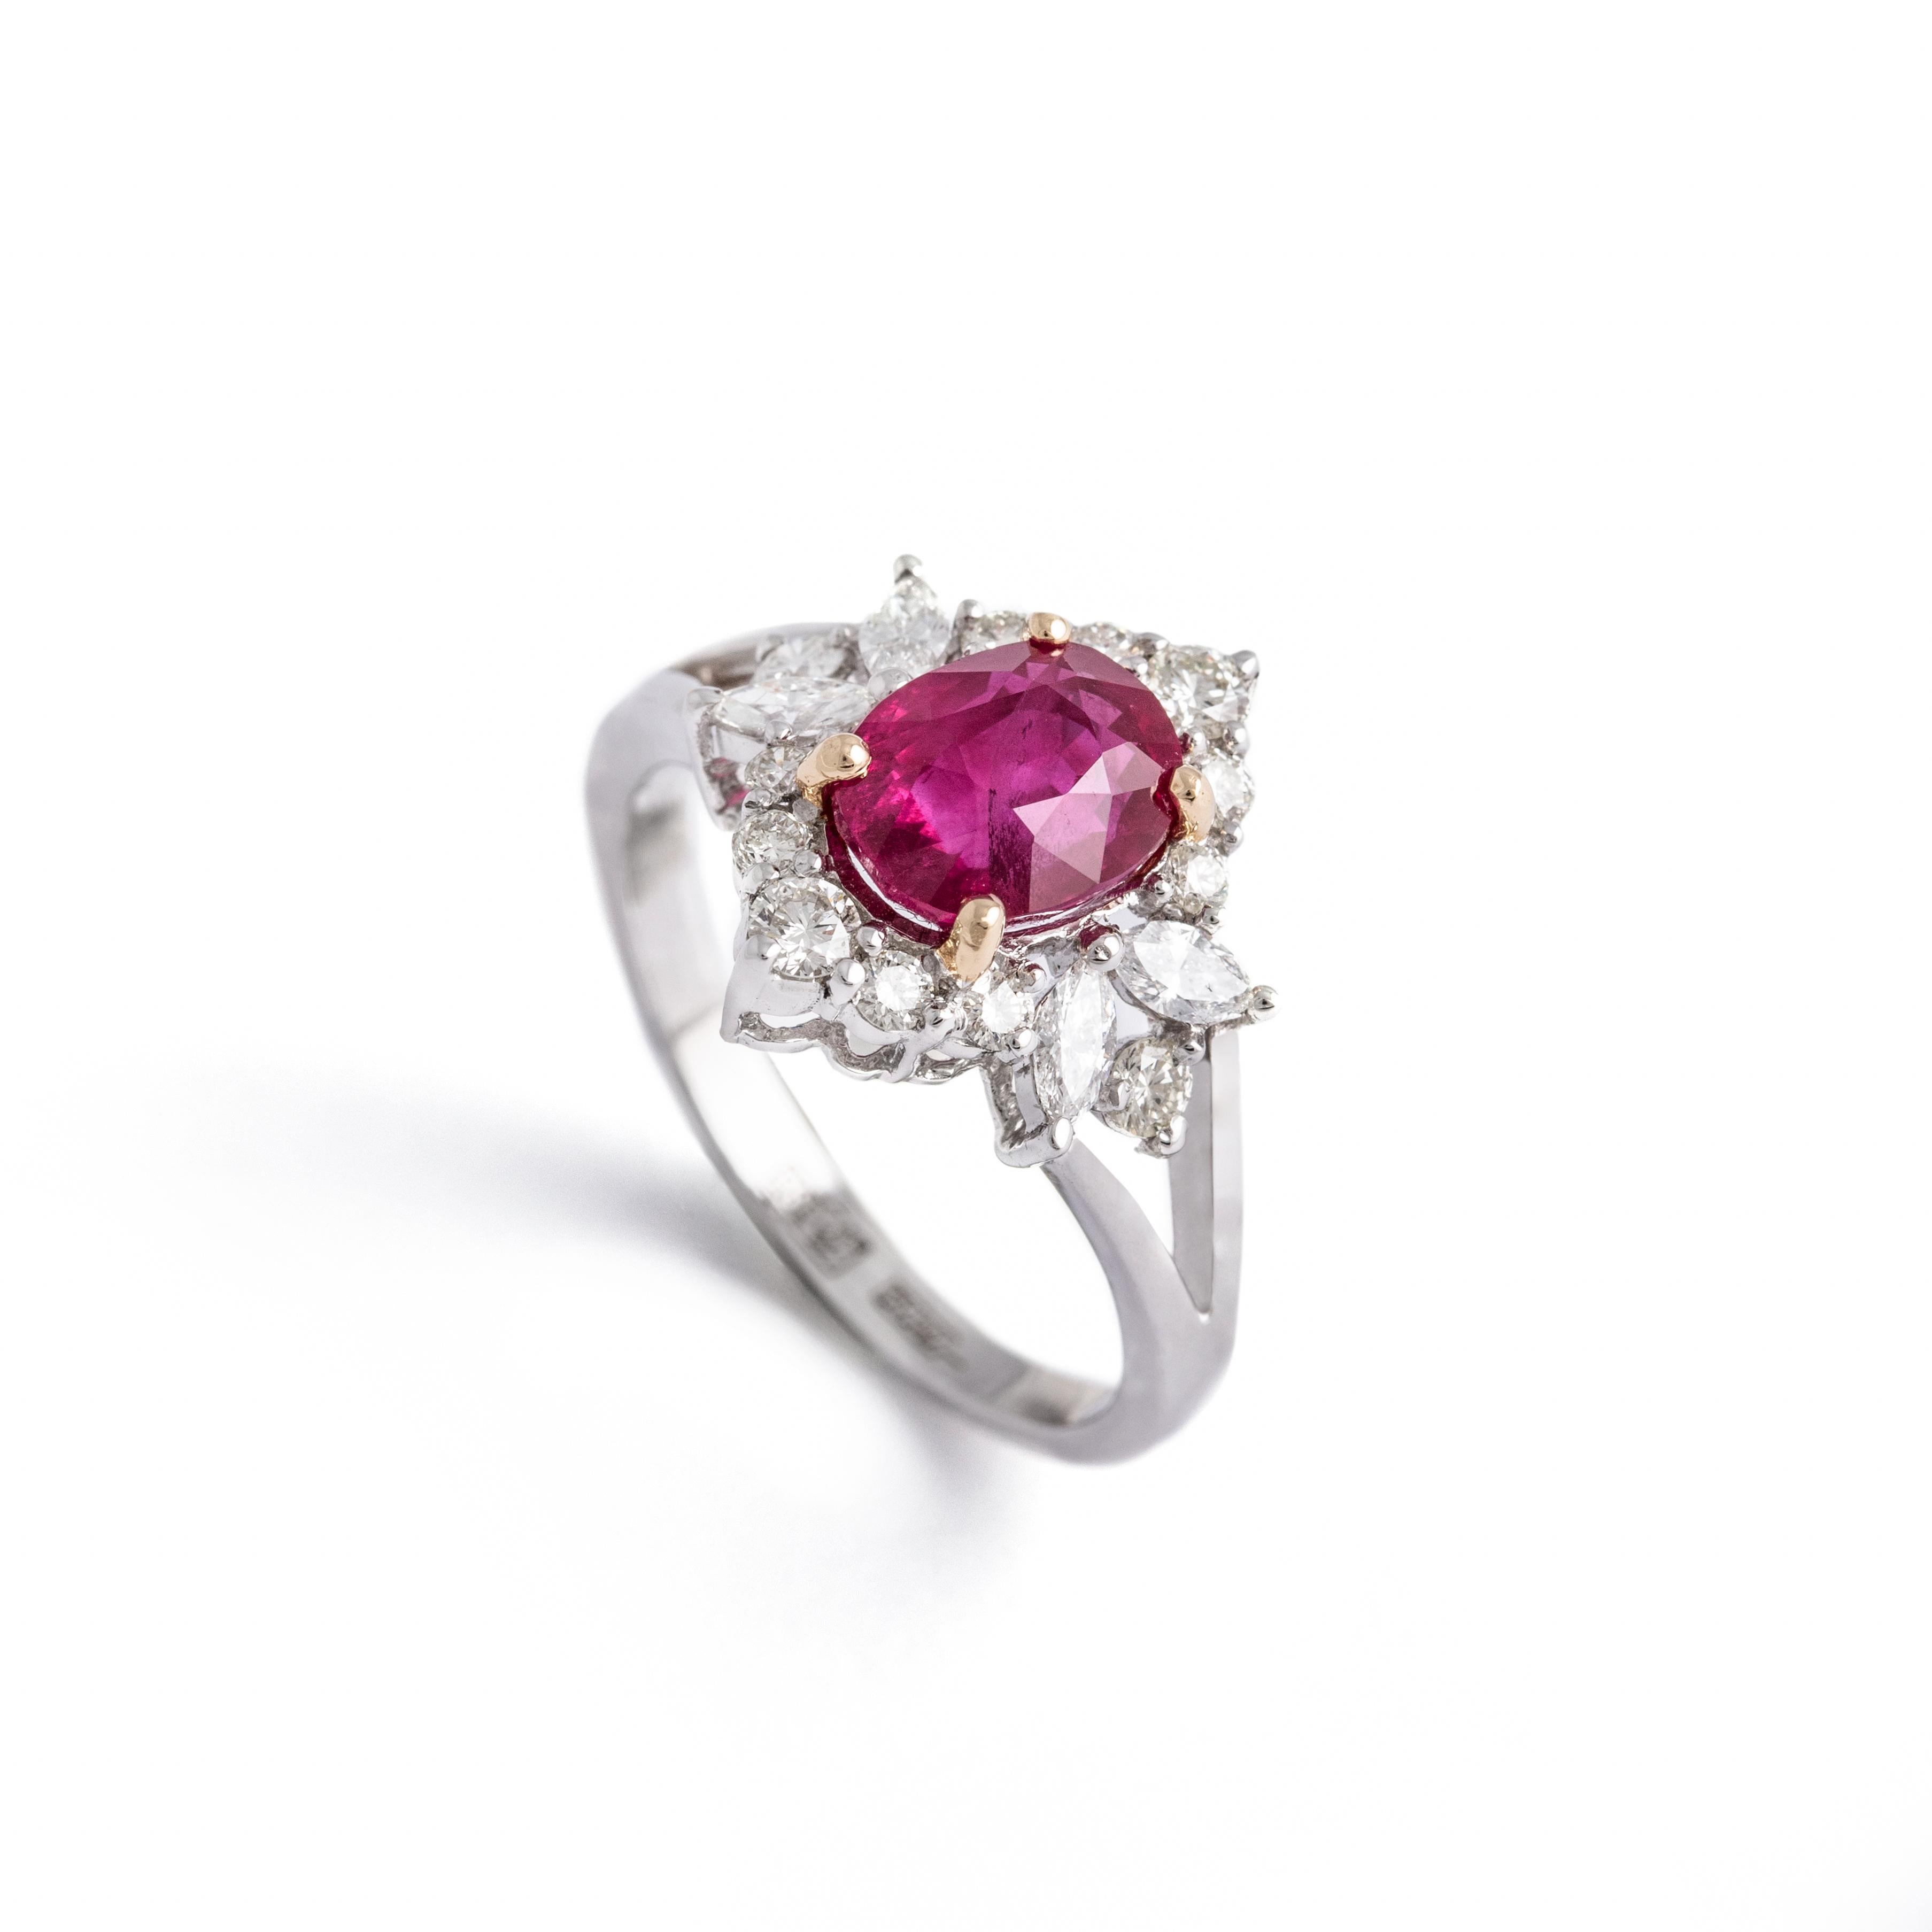 Ruby (not tested) and Diamond white gold Ring.

Total gross weight: 4.95 grams.